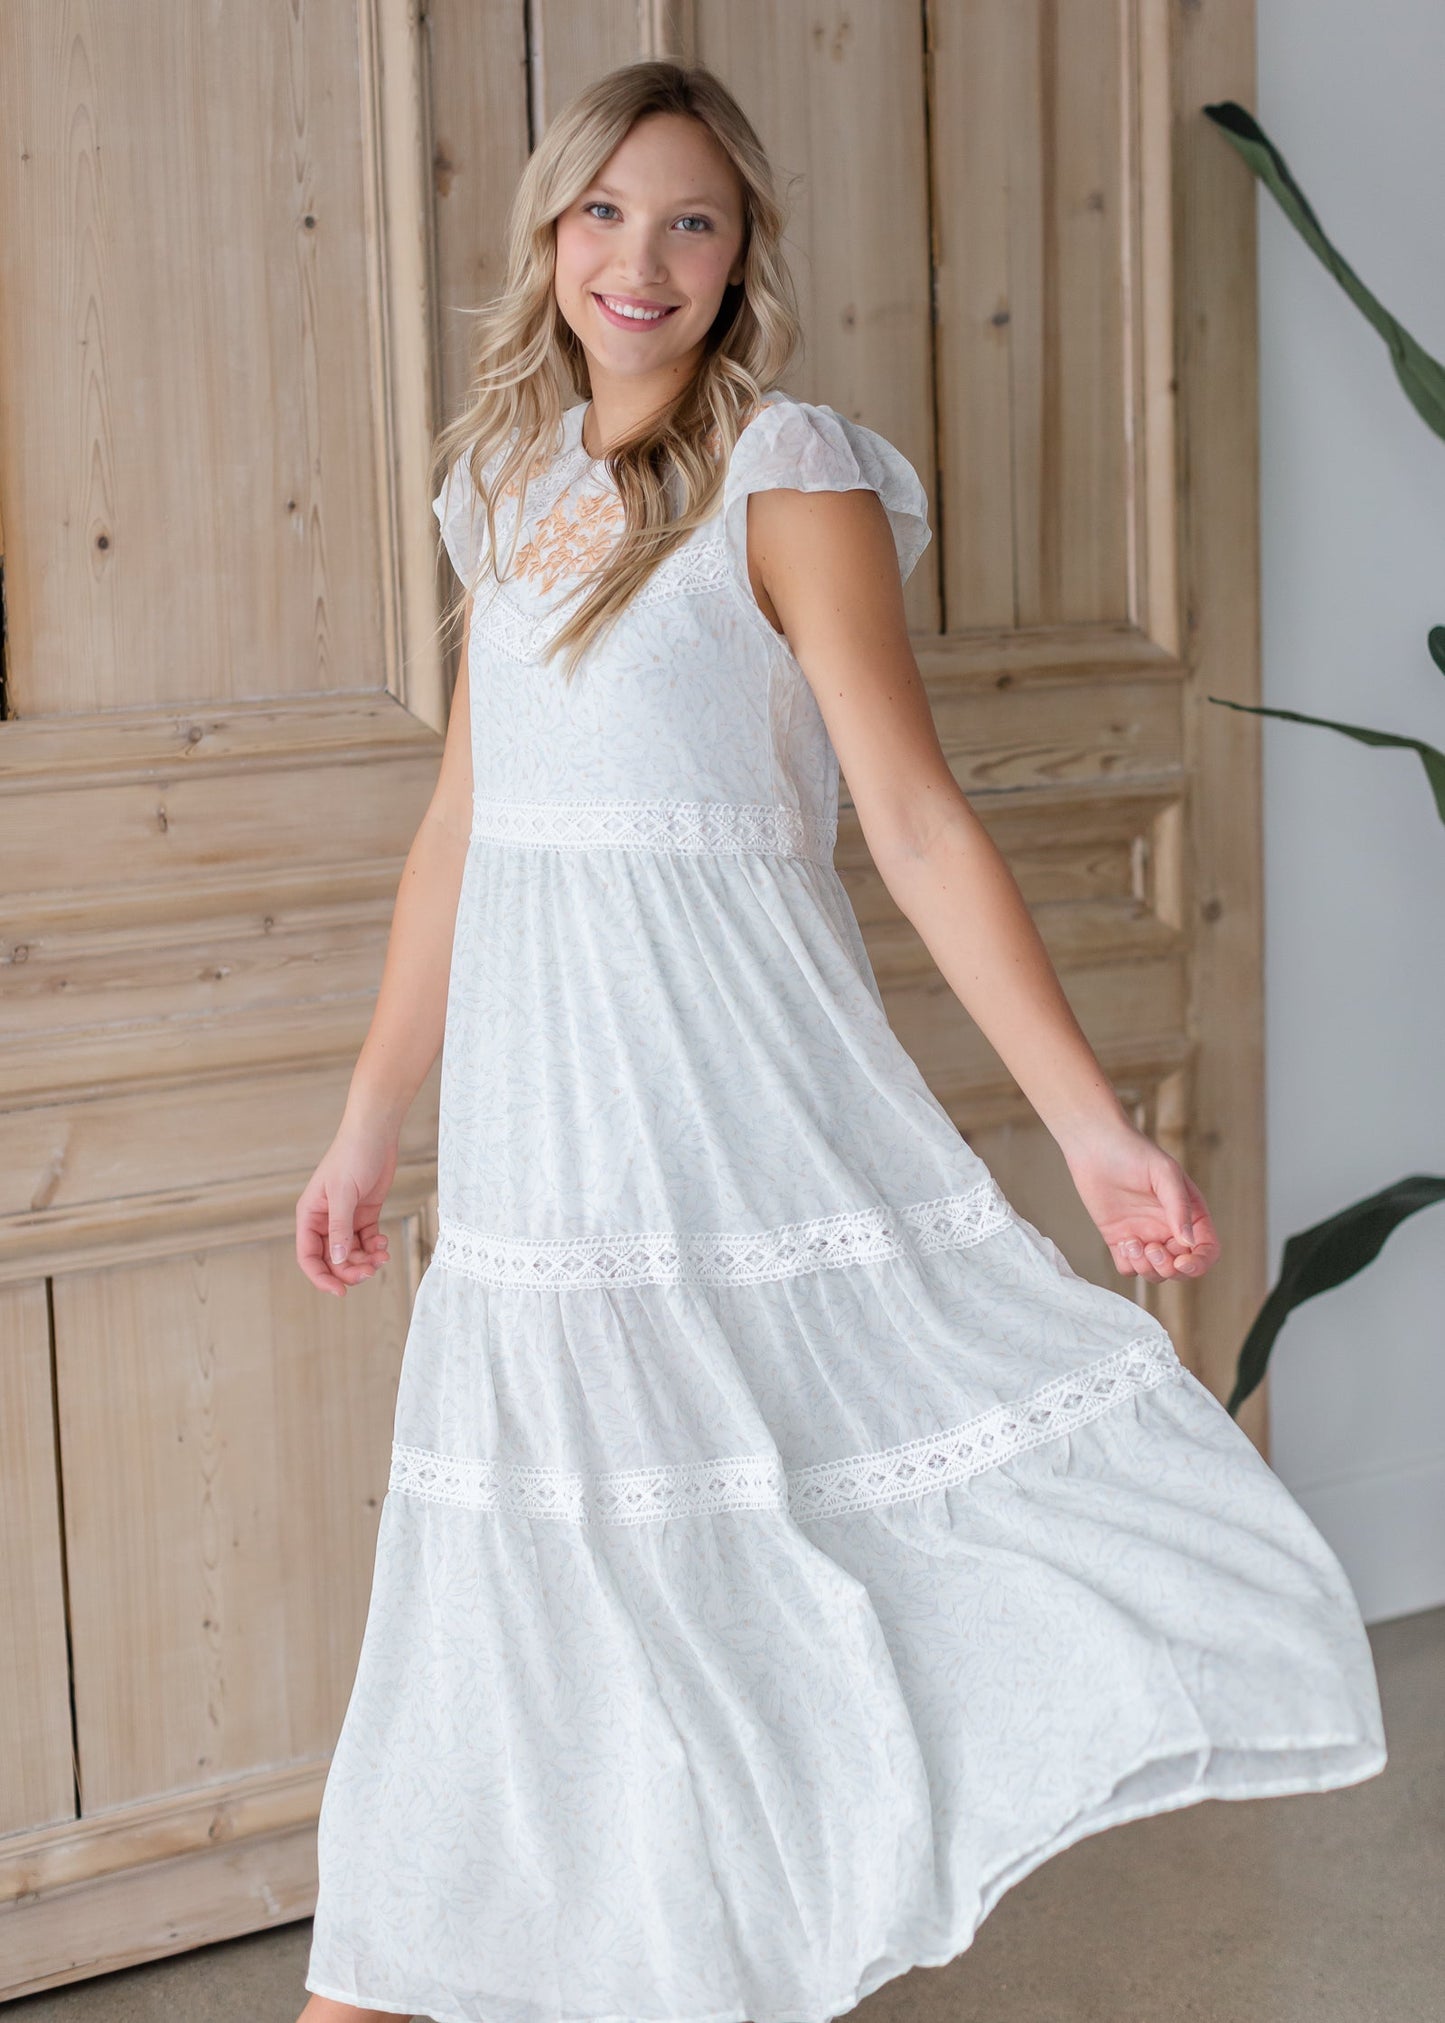 Tiered Maxi Dress with Lace Trim Detail Dresses Polagram